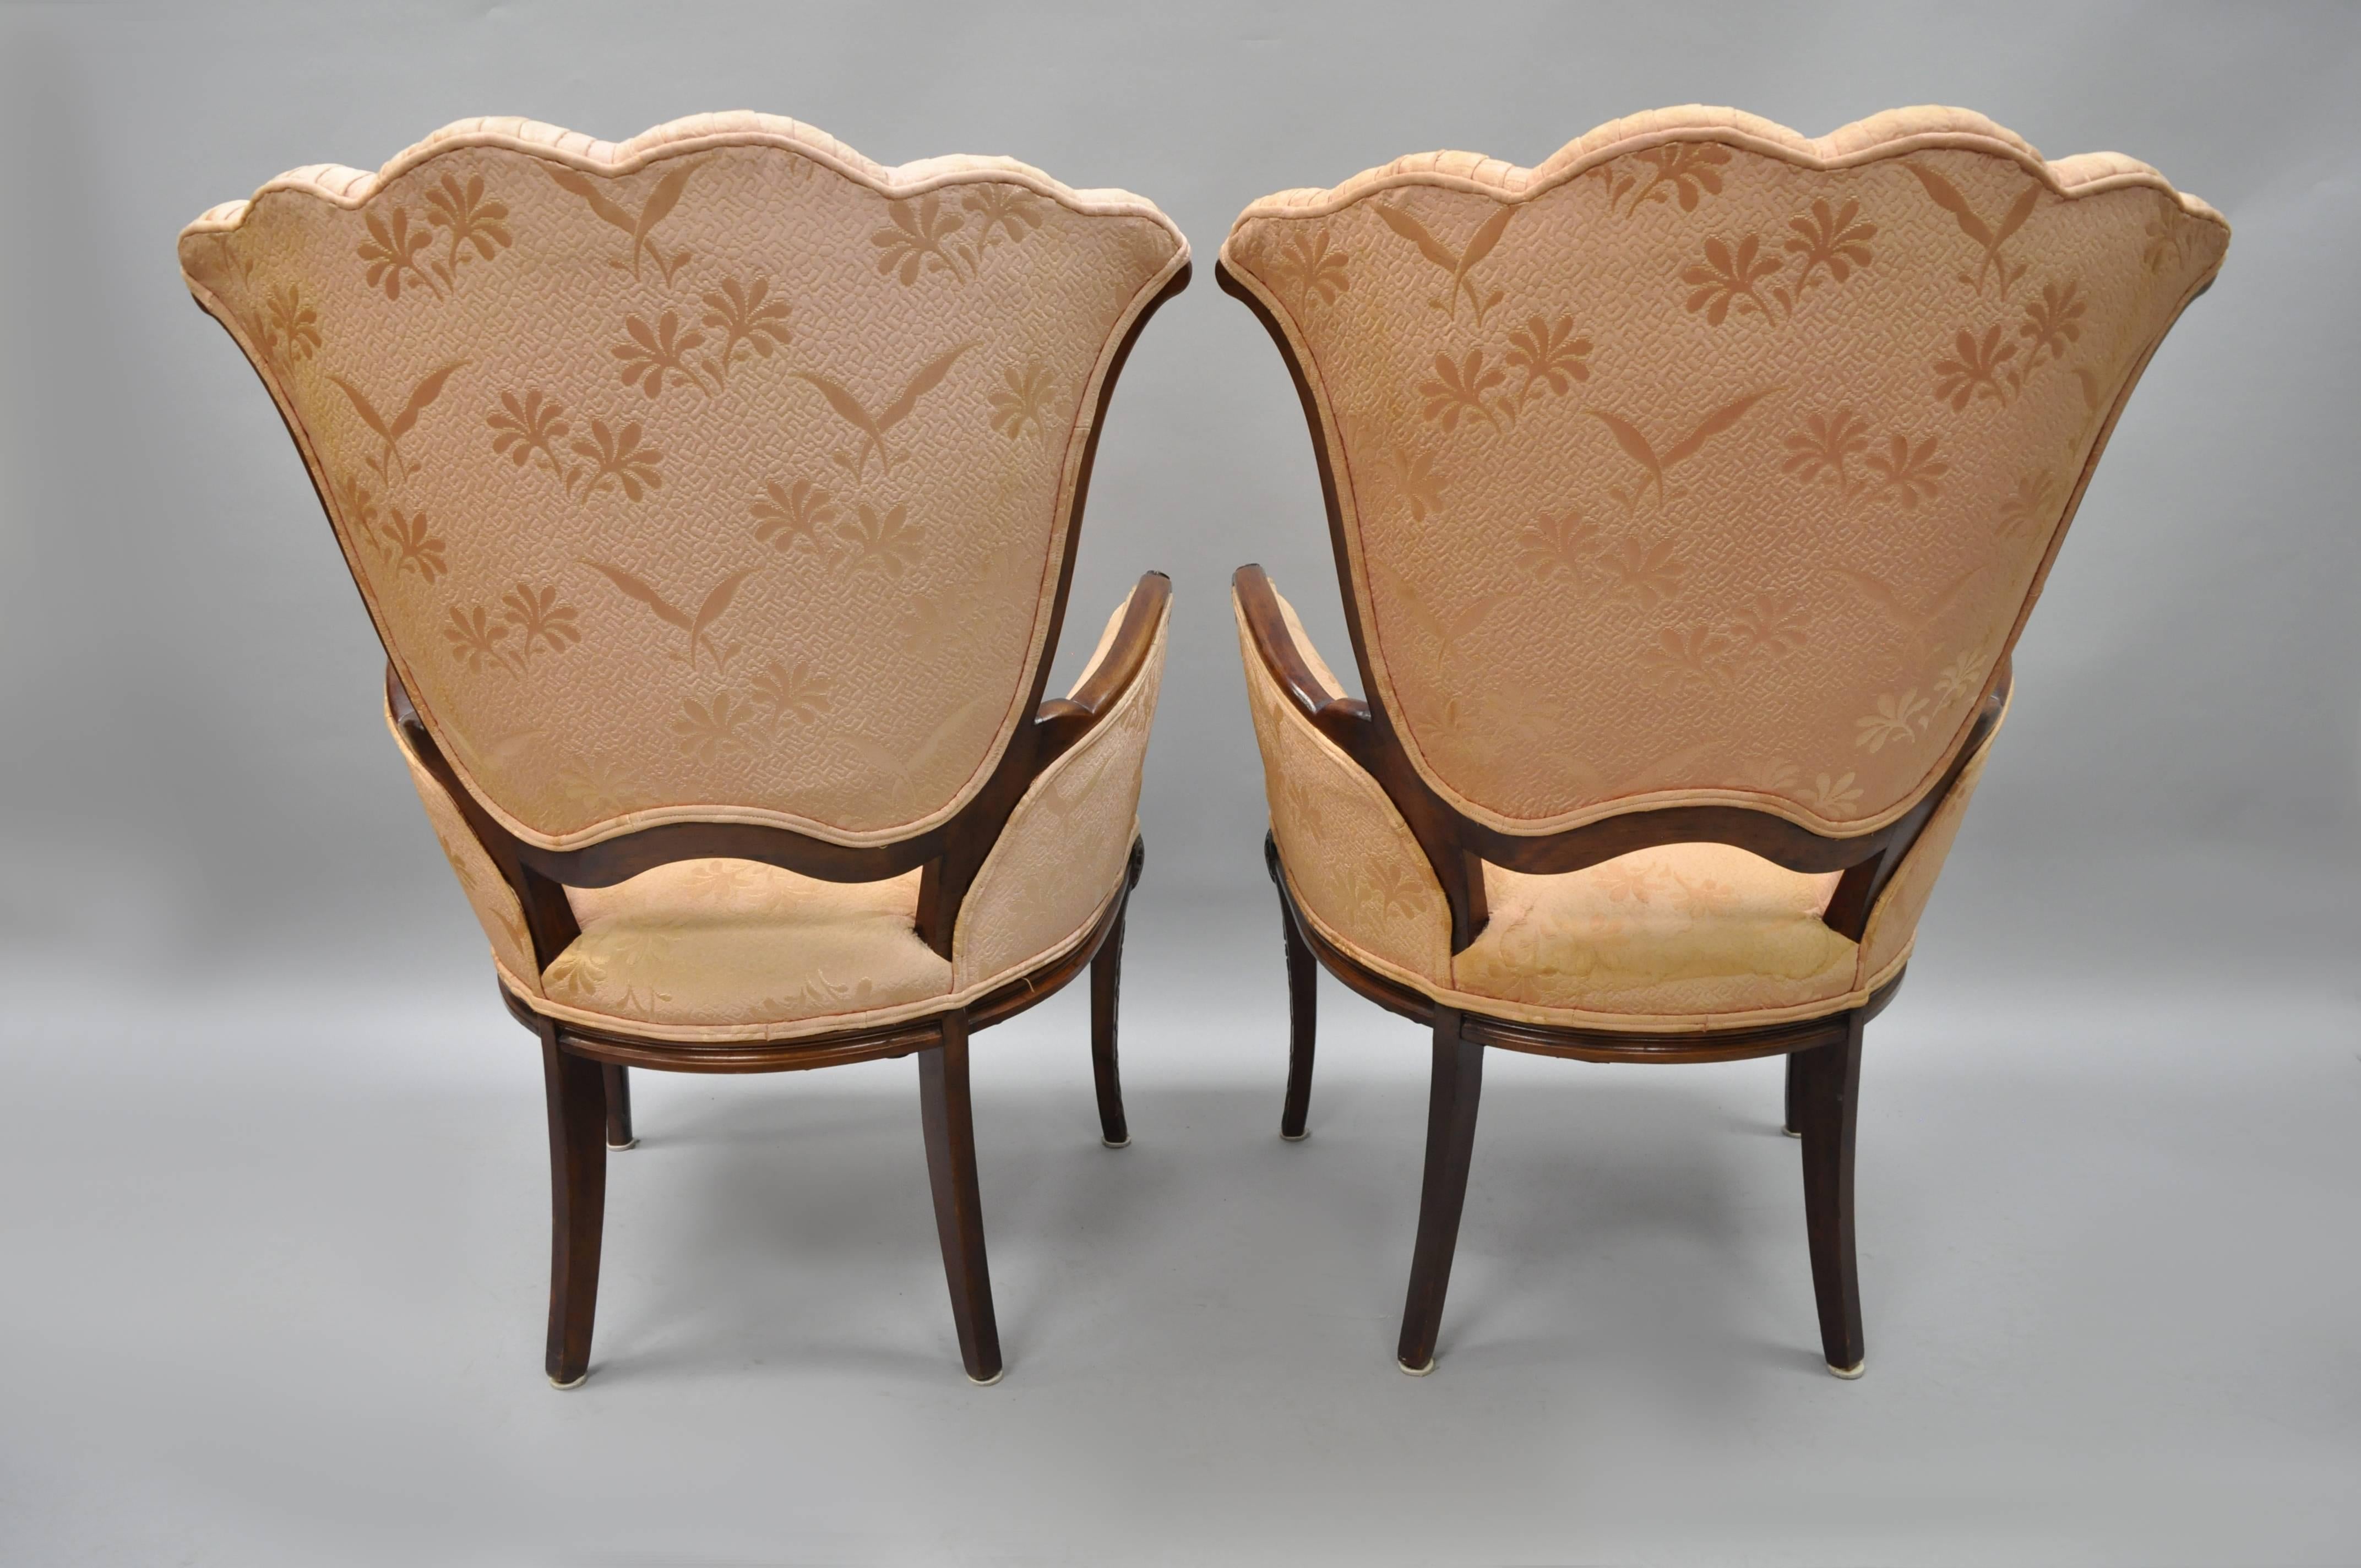 Pair of Mahogany Hollywood Regency Tufted Armchairs Attributed to Grosfeld House For Sale 2